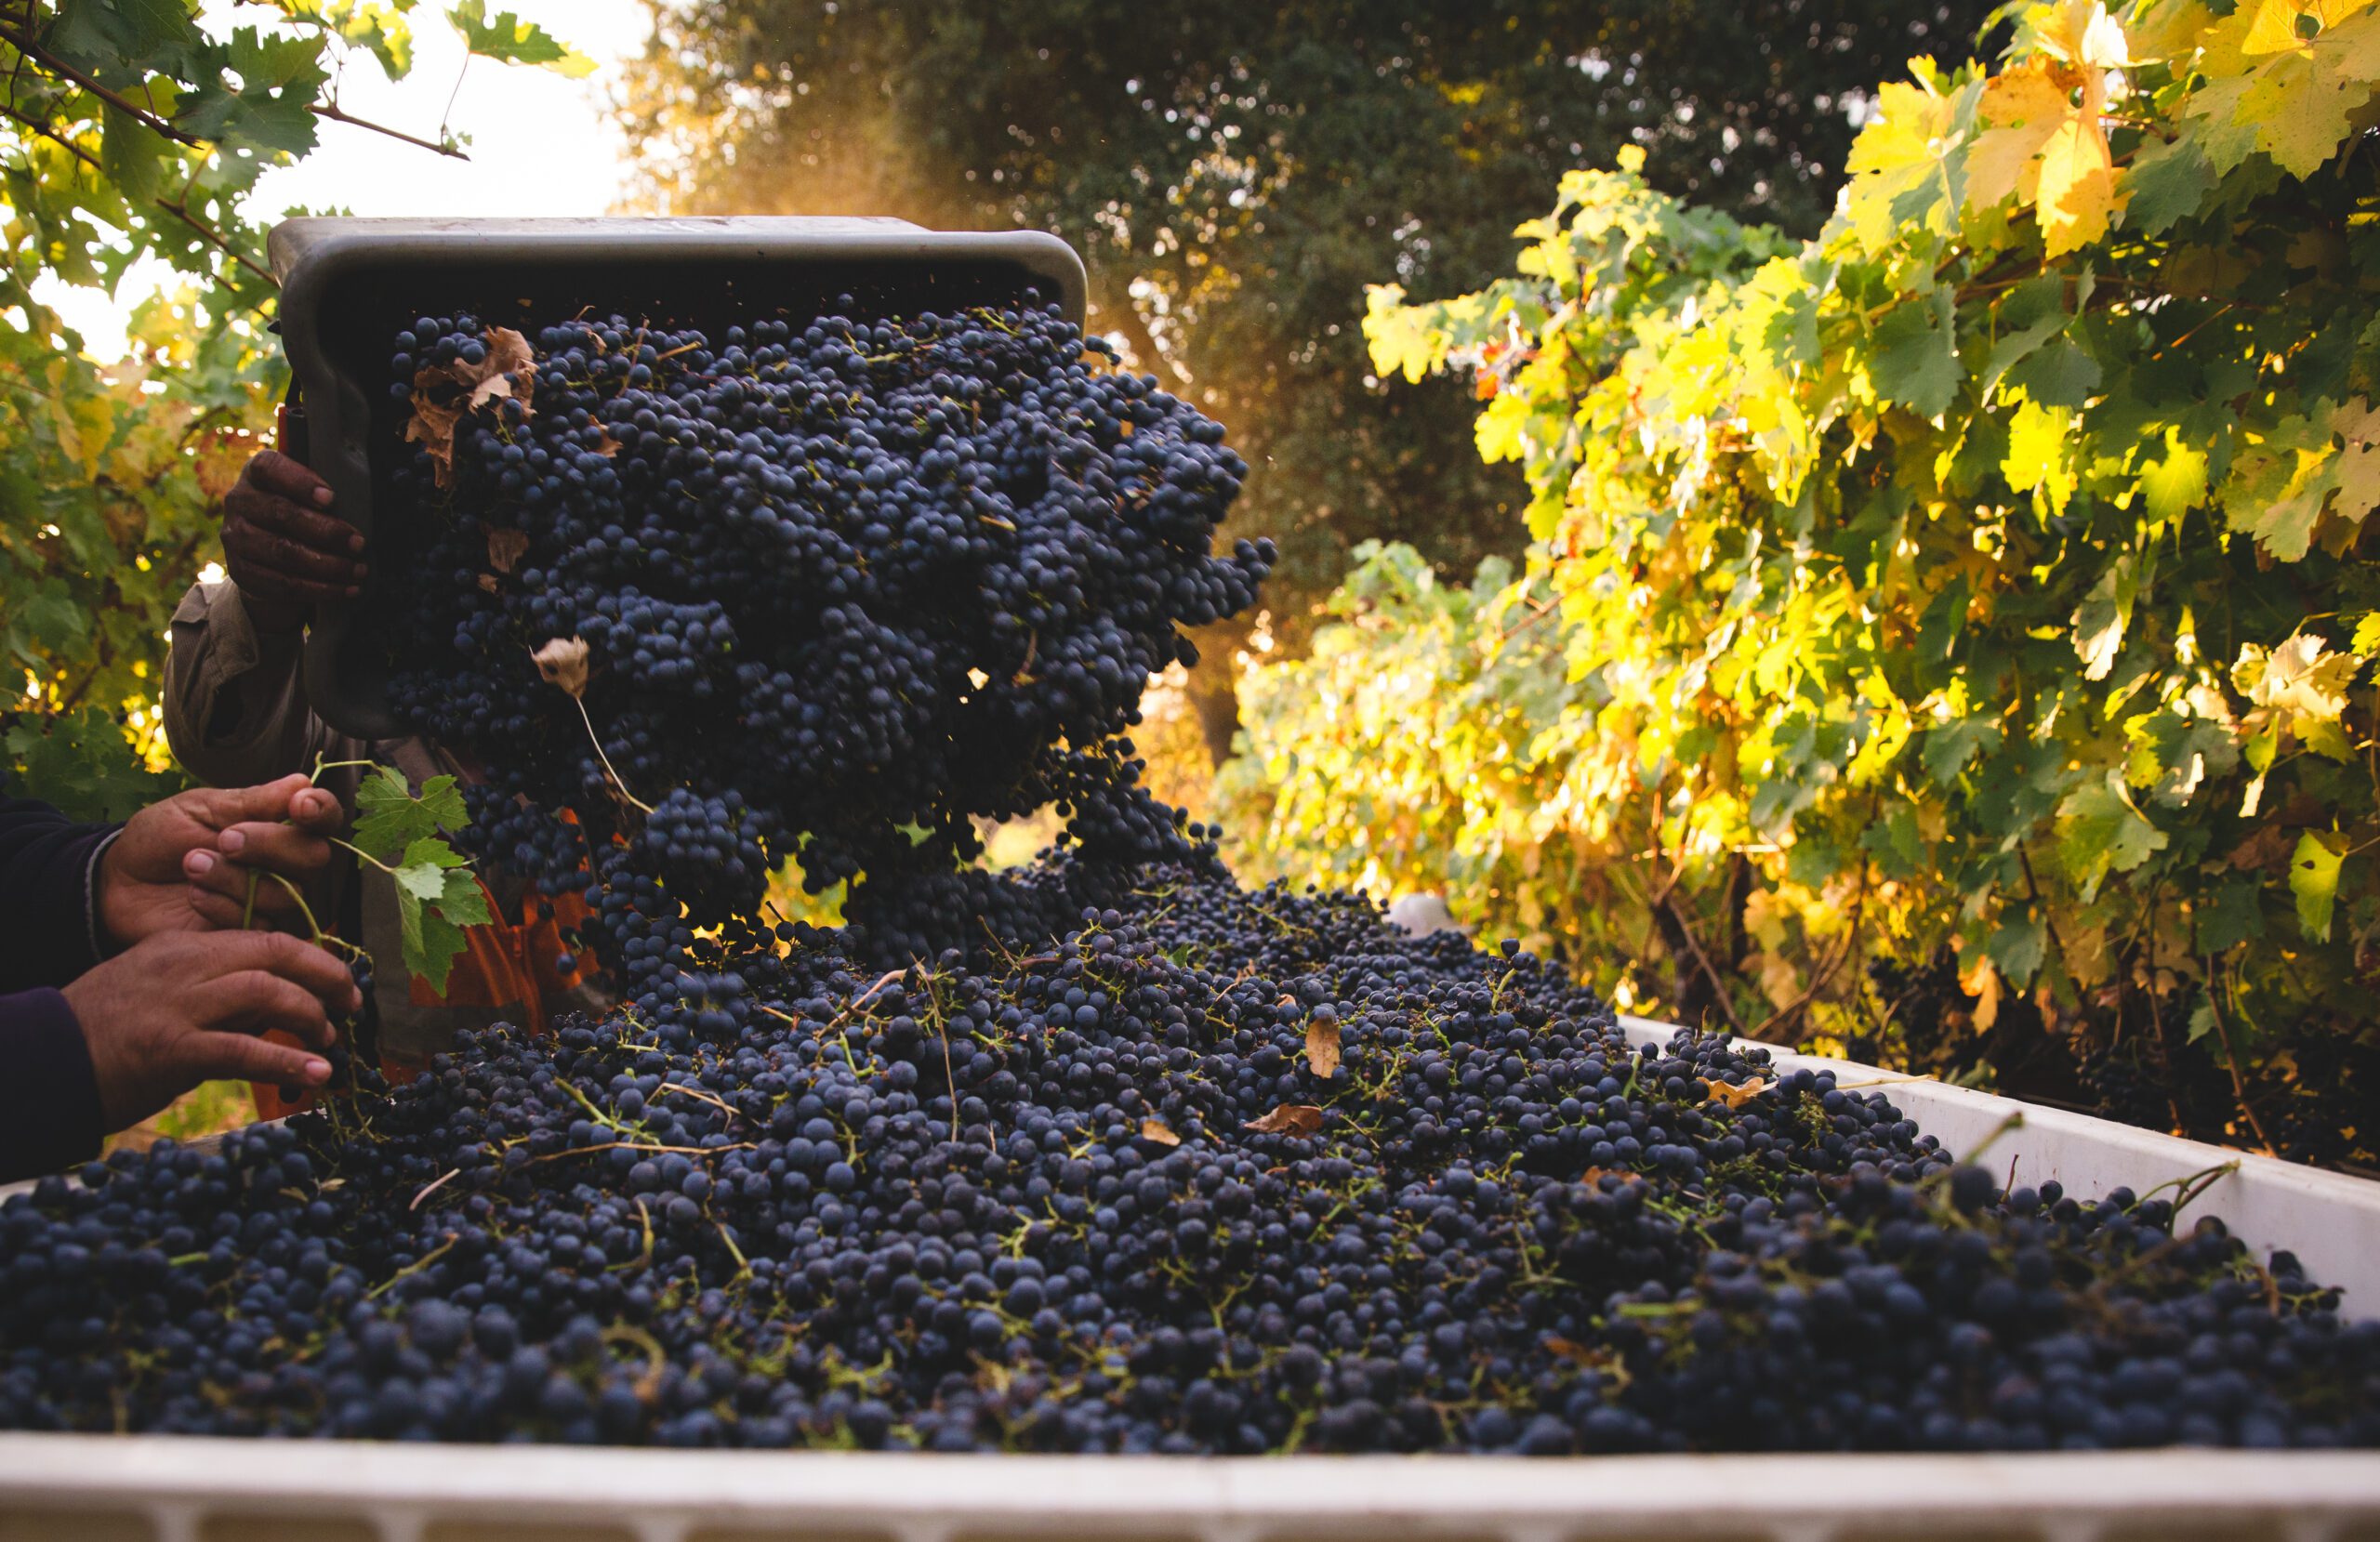 Grapes being poured into container from harvest